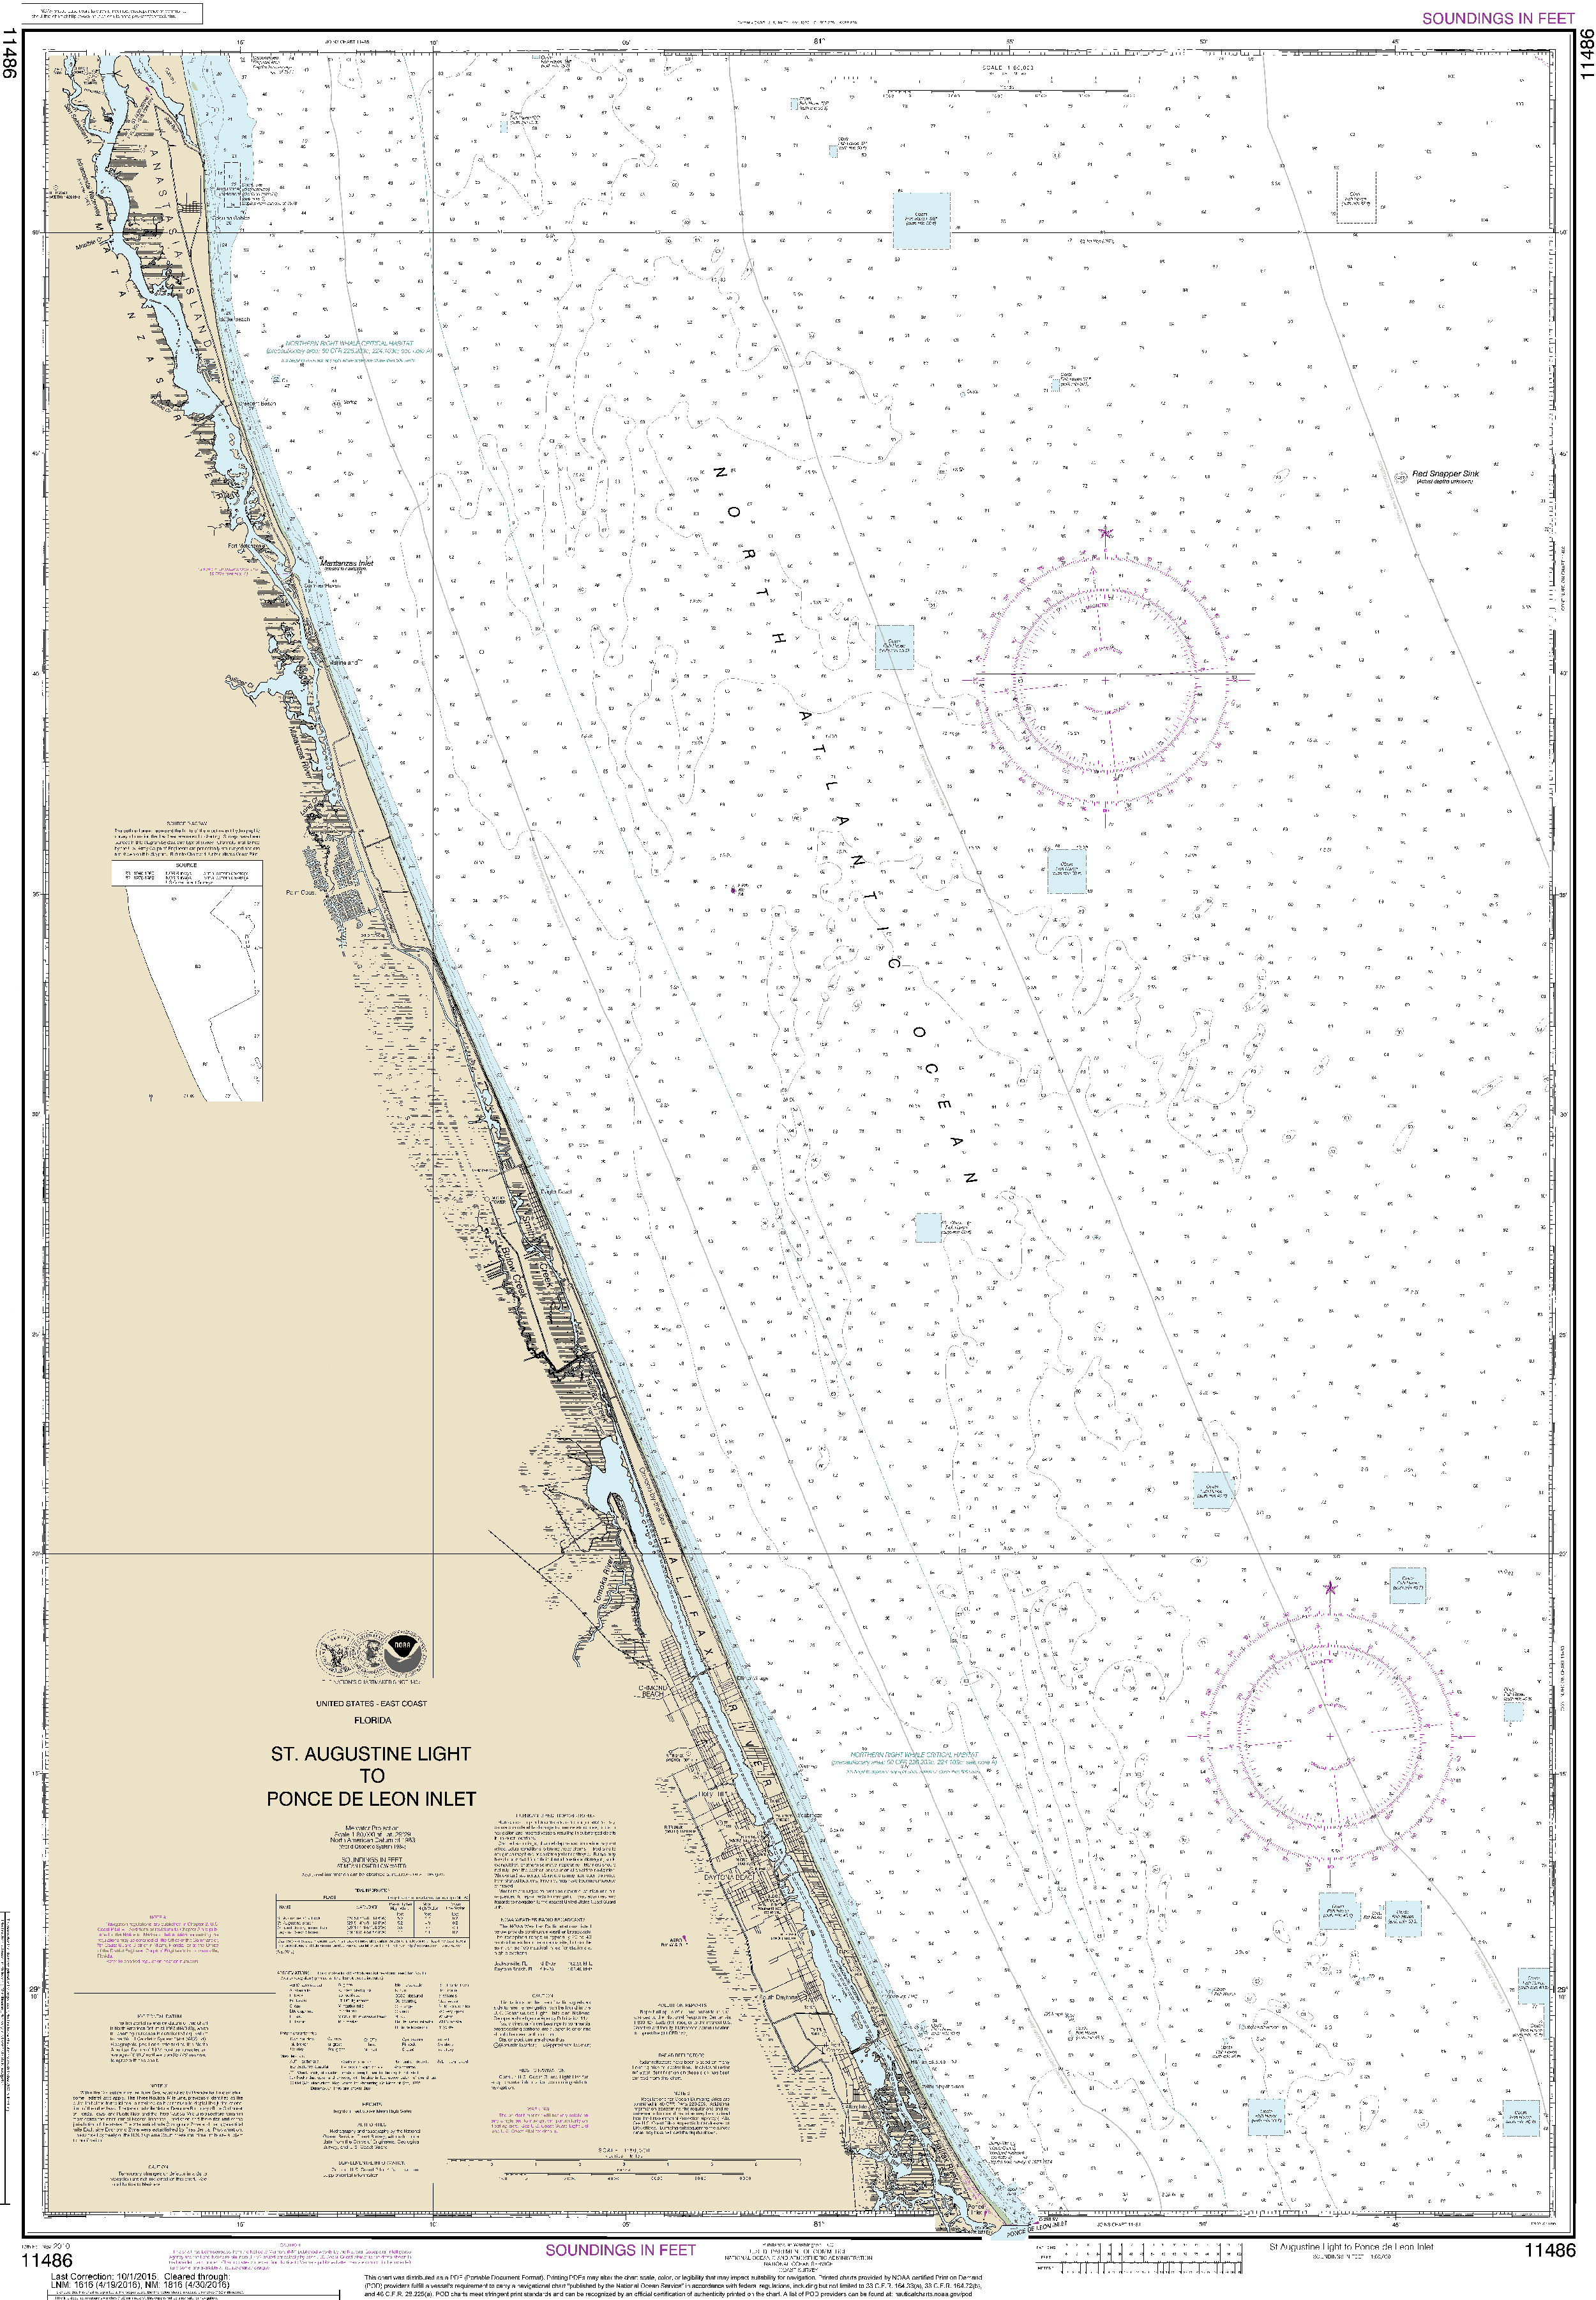 NOAA Nautical Chart 11486: St. Augustine Light to Ponce de Leon Inlet